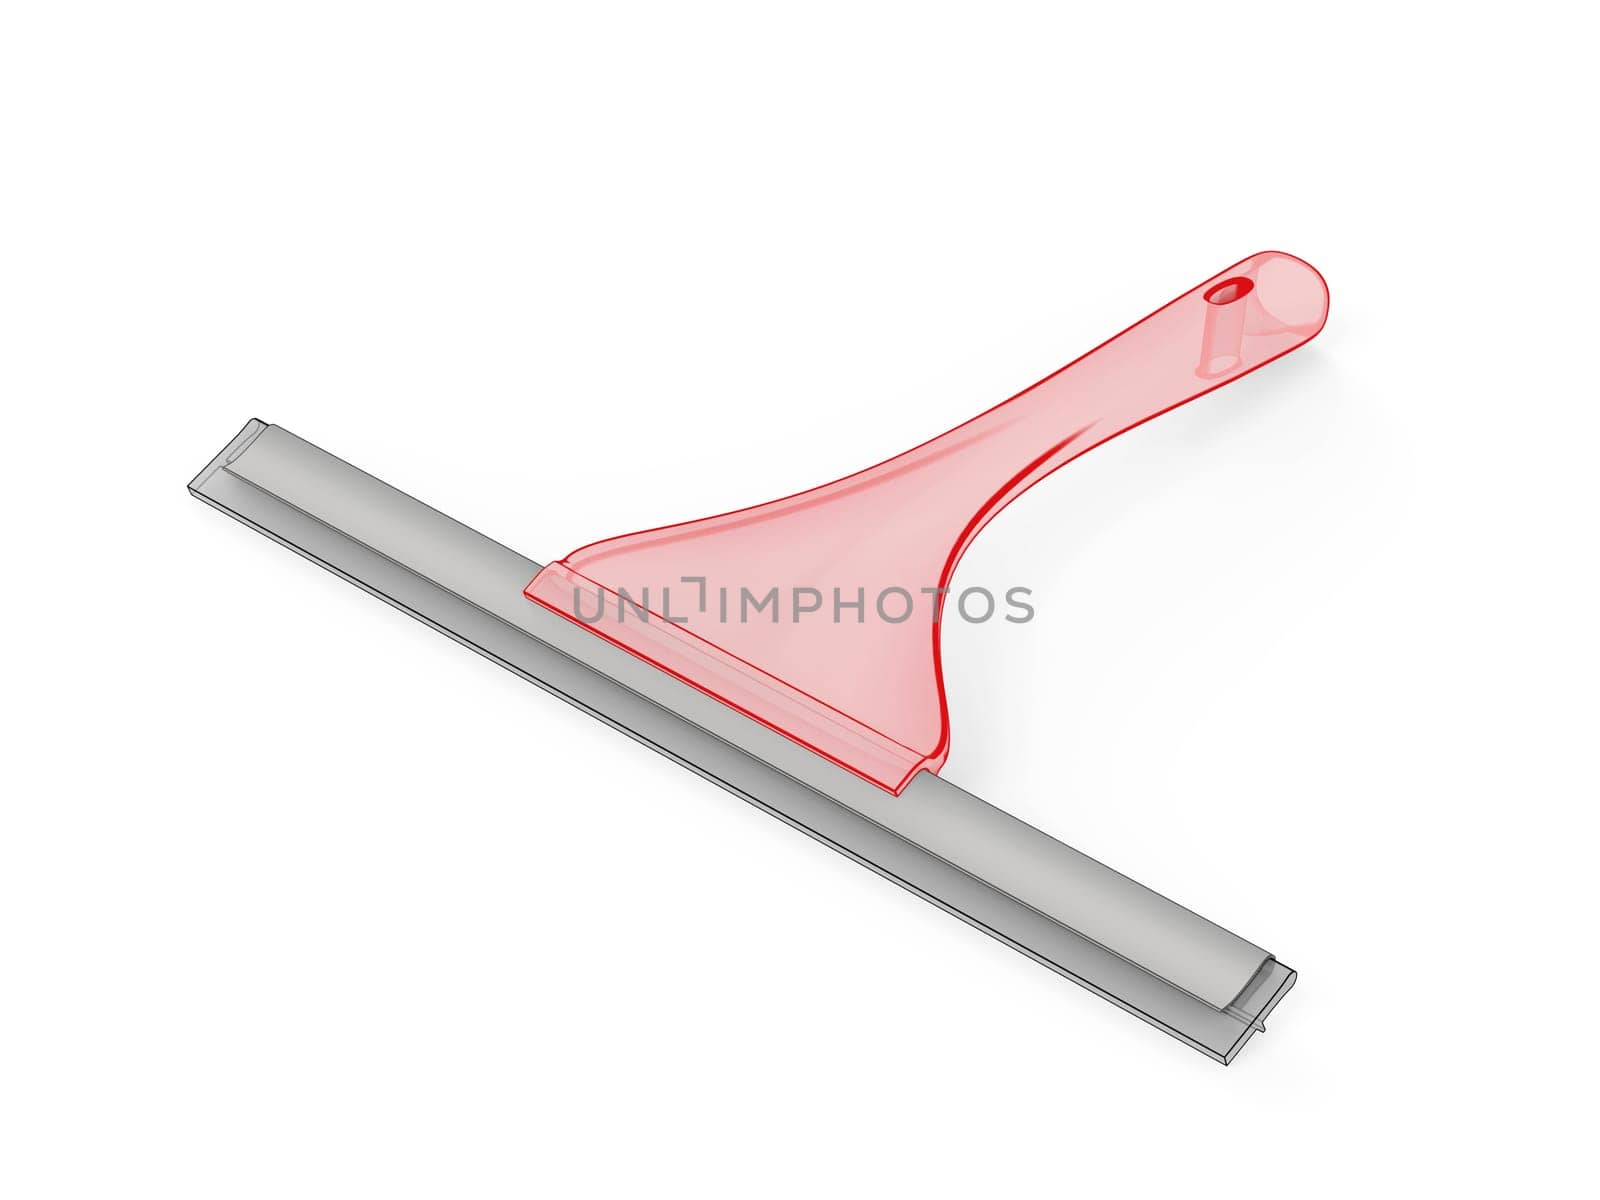 Sketch of window squeegee by magraphics